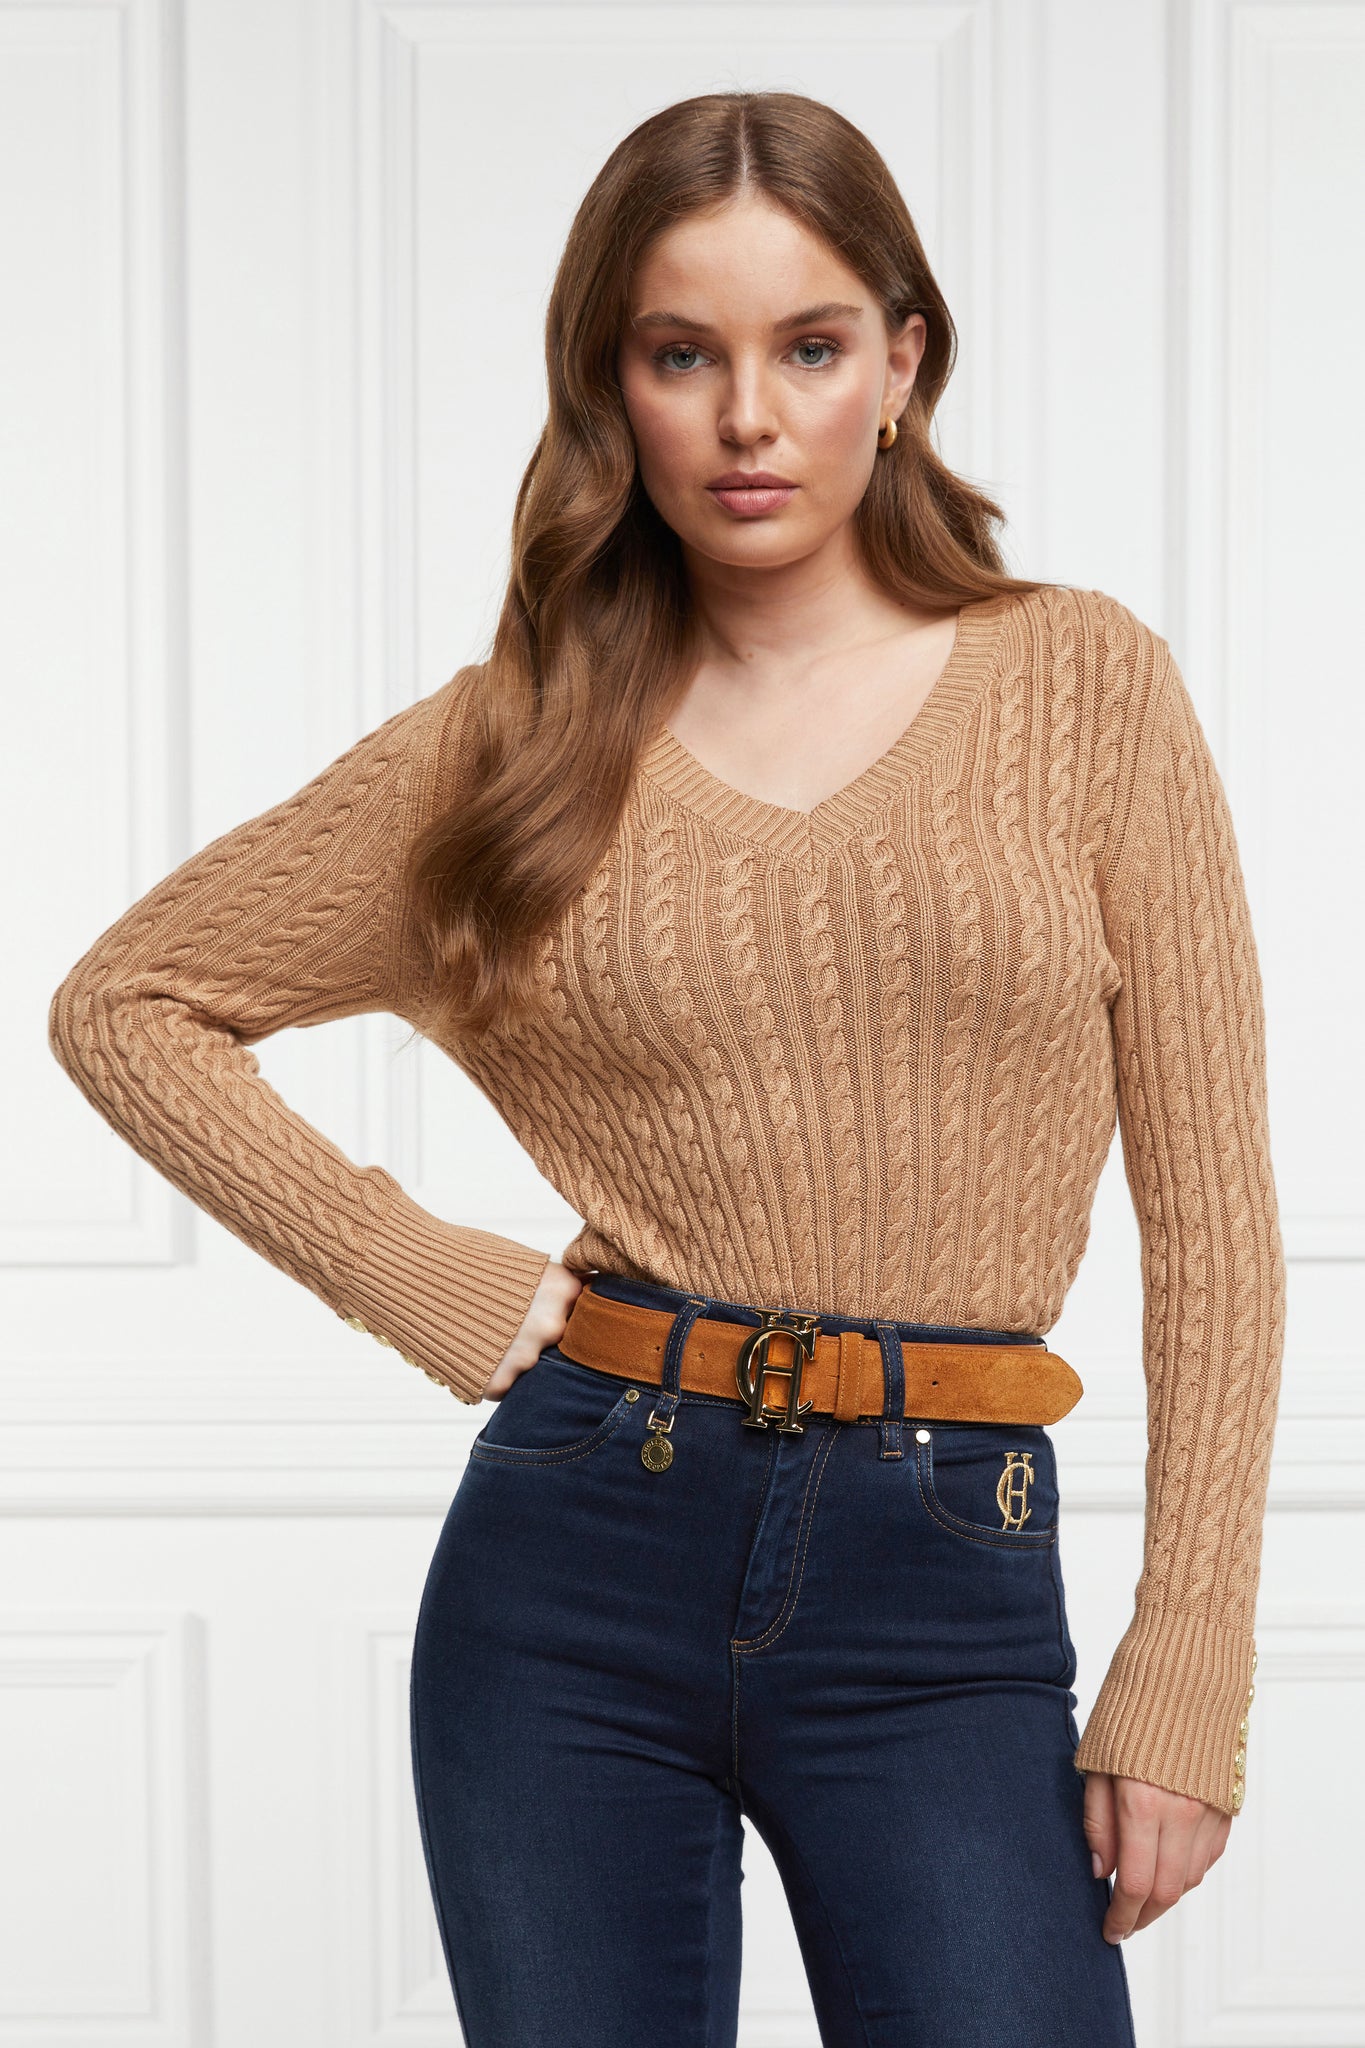 womens lightweight v neck cable knit jumper in dark caramel detailed with gold buttons at the cuffs